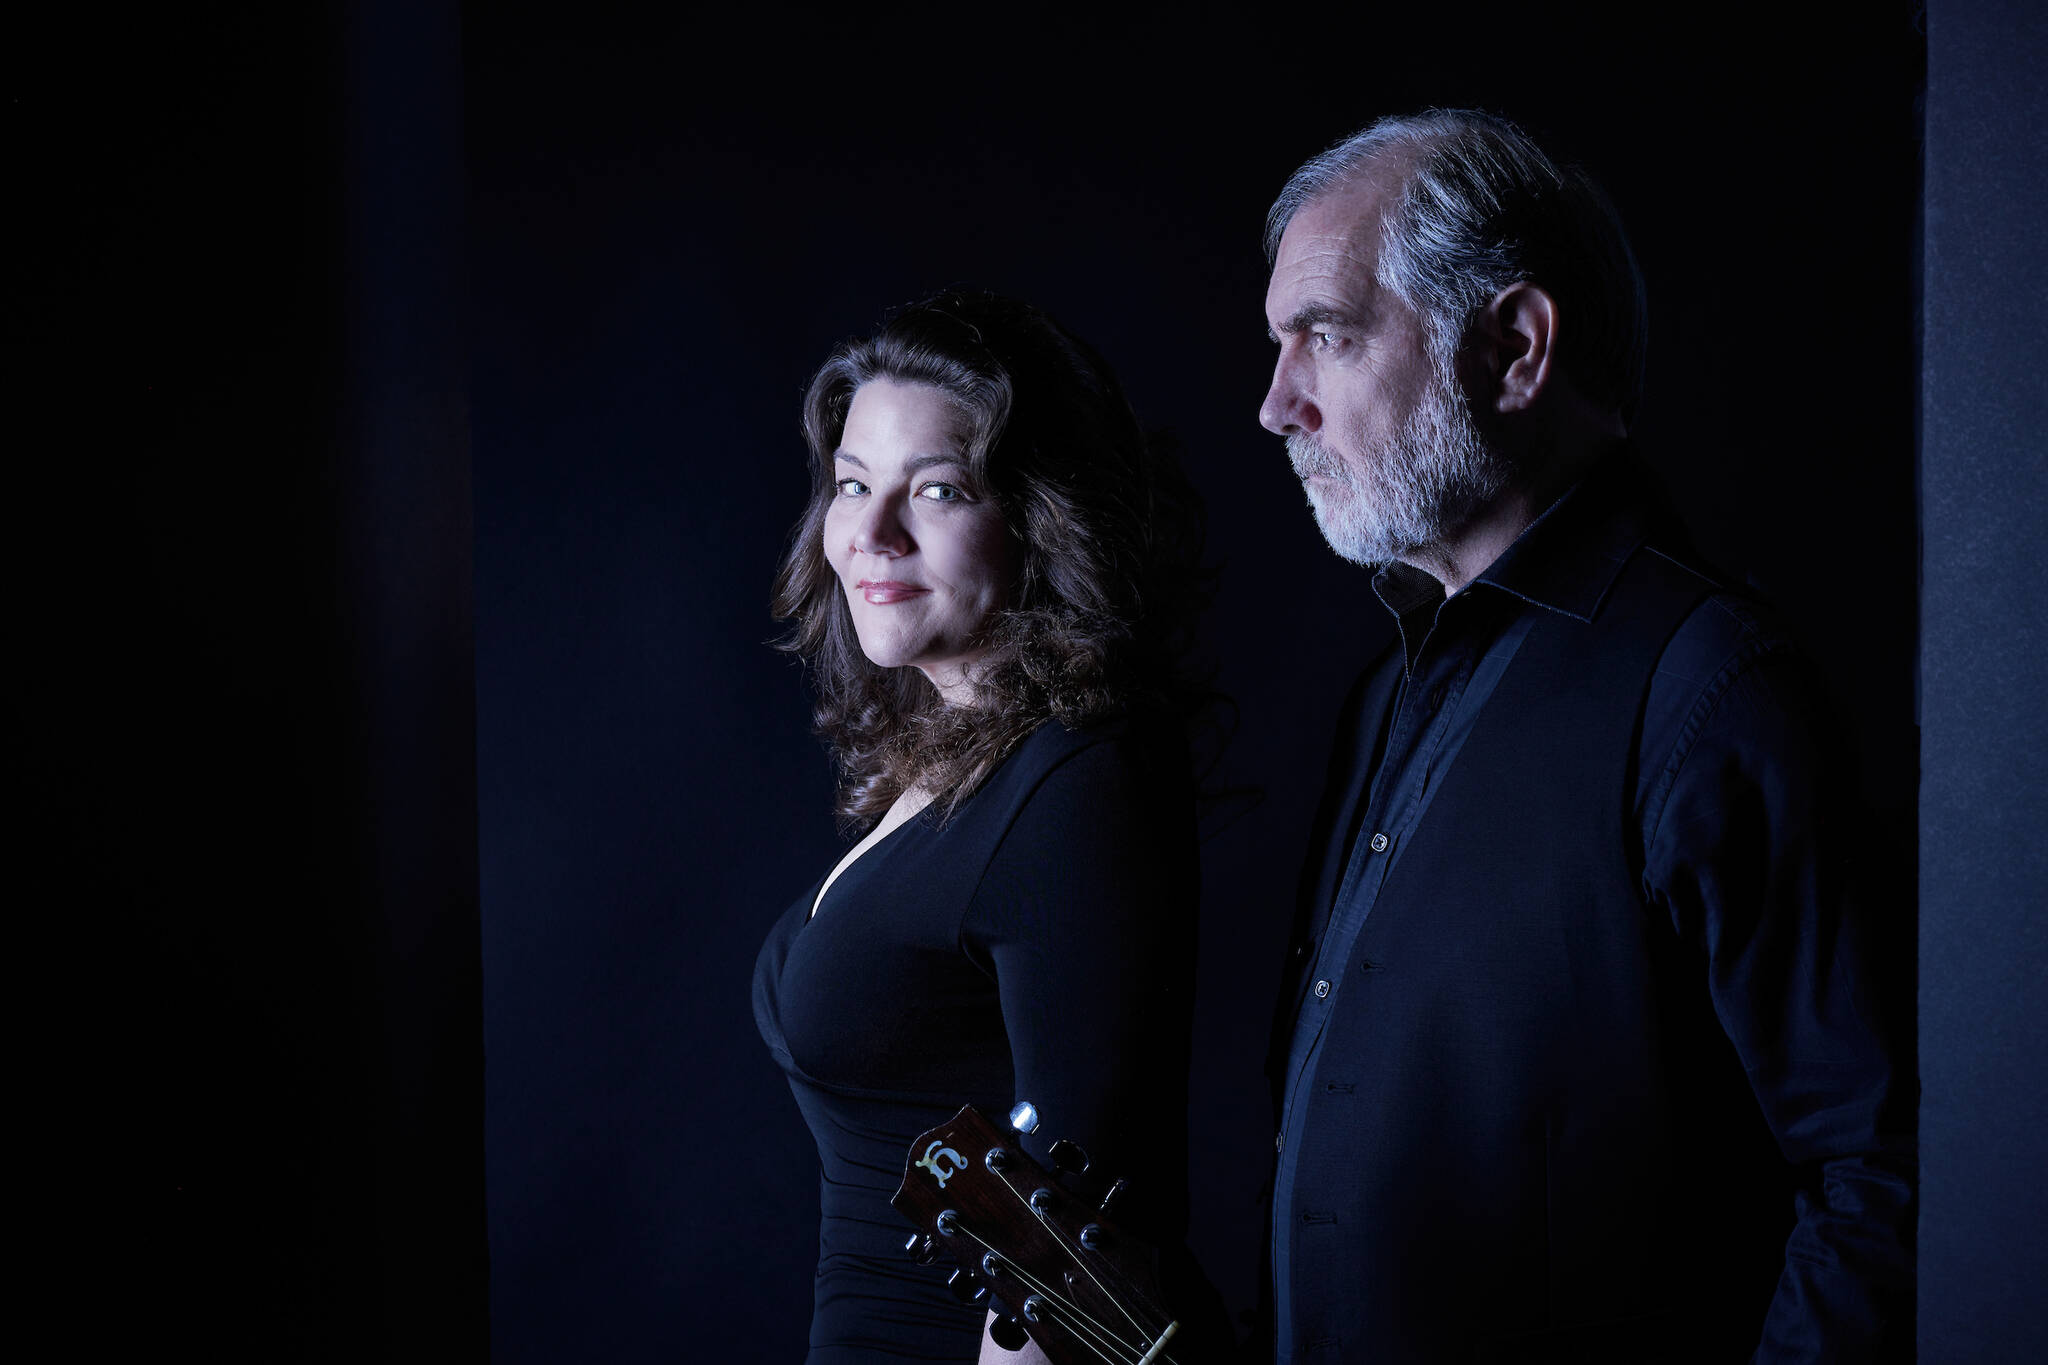 Photo provided
Jeannette d’Armand and John Patrick Lowrie are a powerful musical duo that will be performing in Freeland.